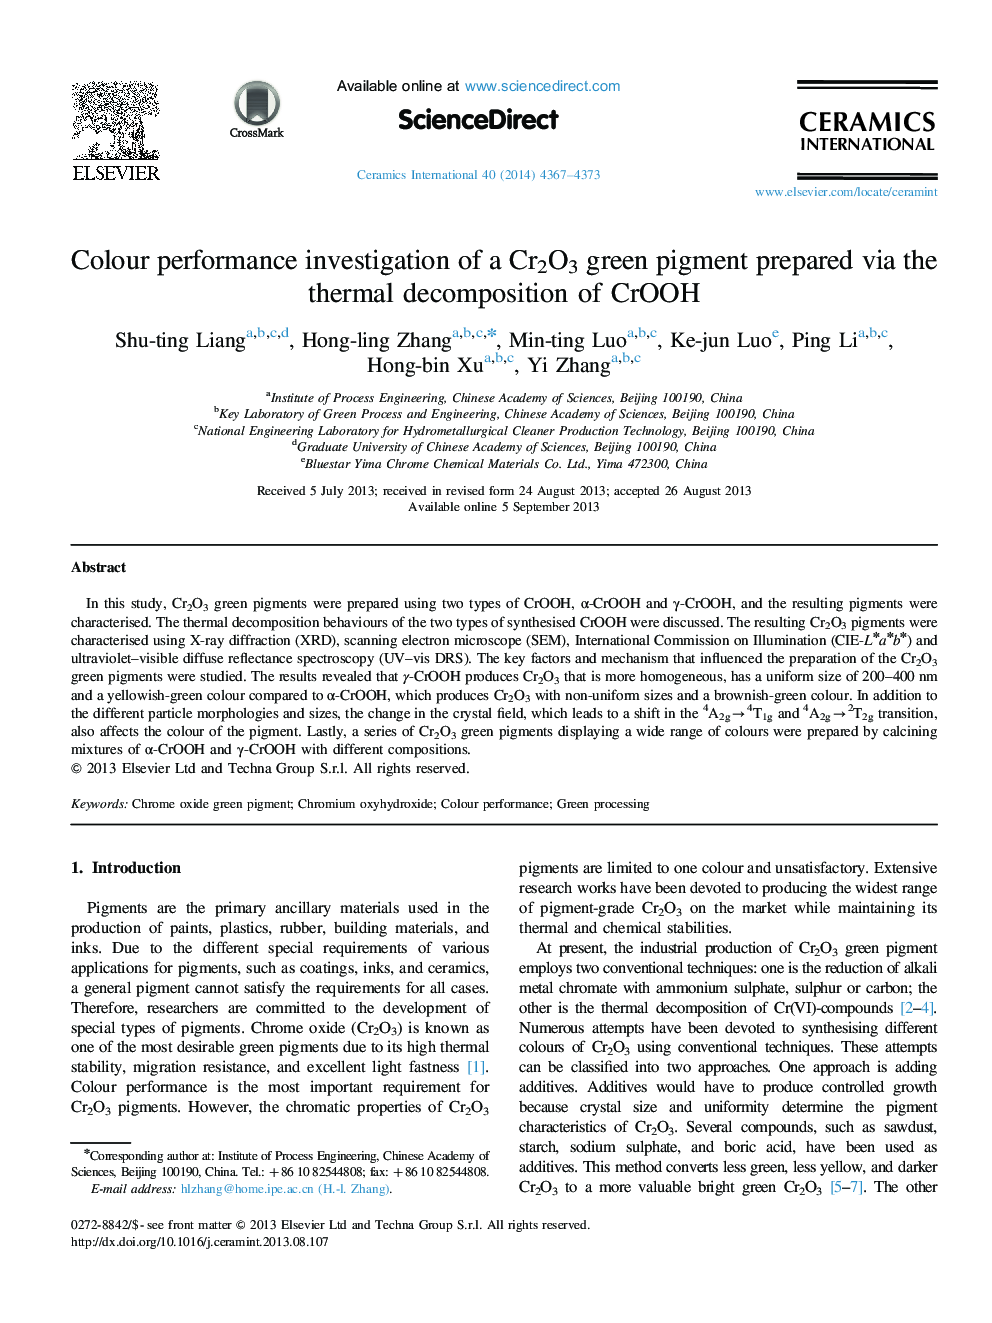 Colour performance investigation of a Cr2O3 green pigment prepared via the thermal decomposition of CrOOH